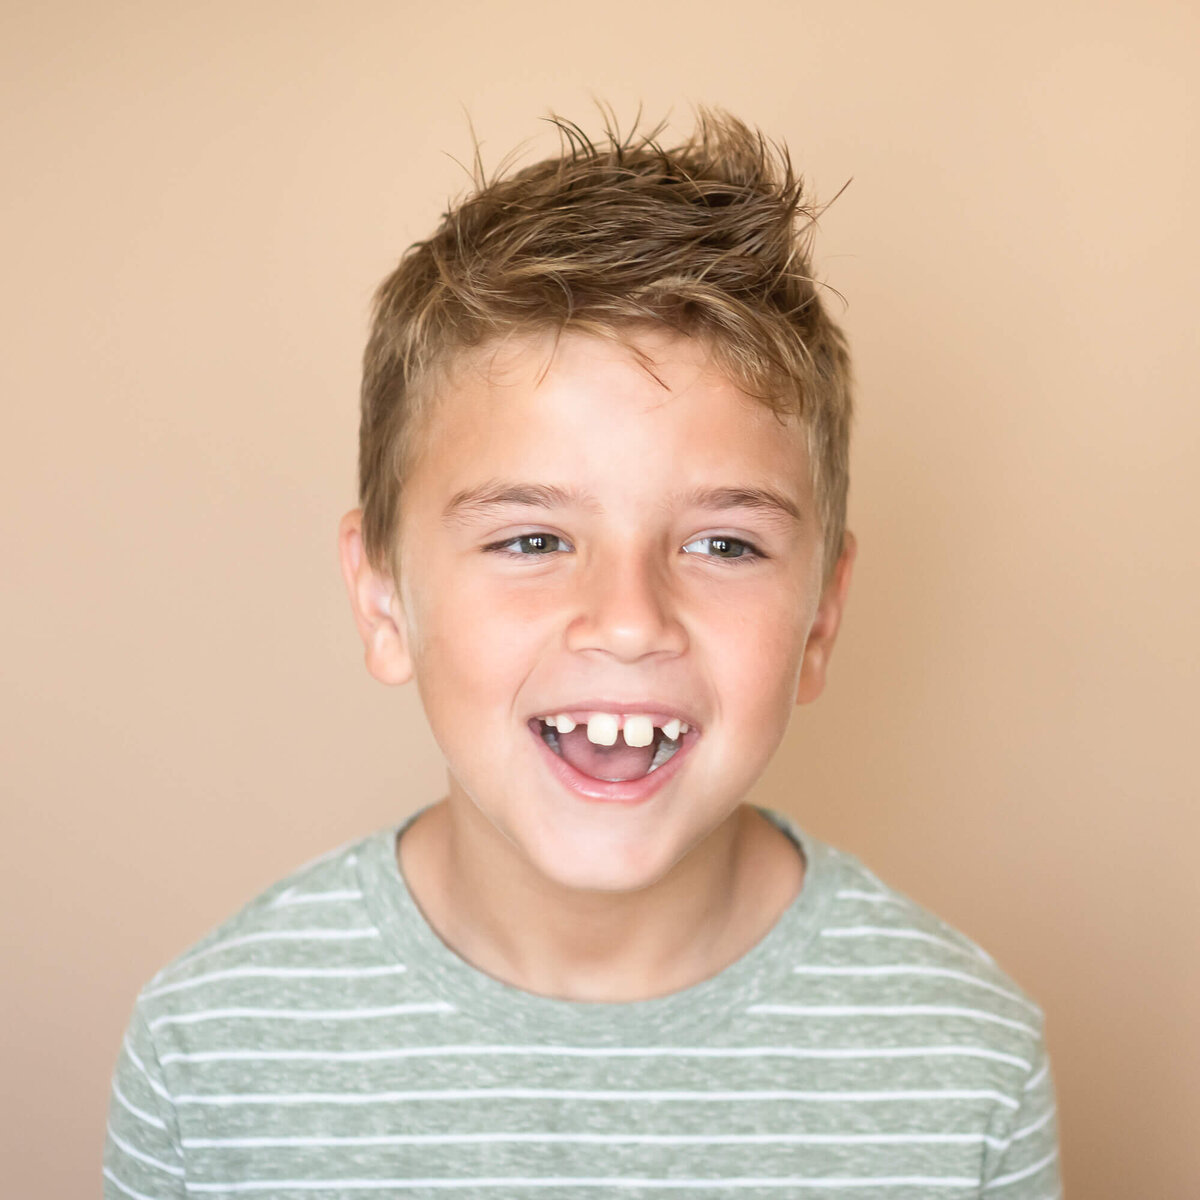 children's studio portrait of young boy laughing in sage and white striped shirt with a tan background